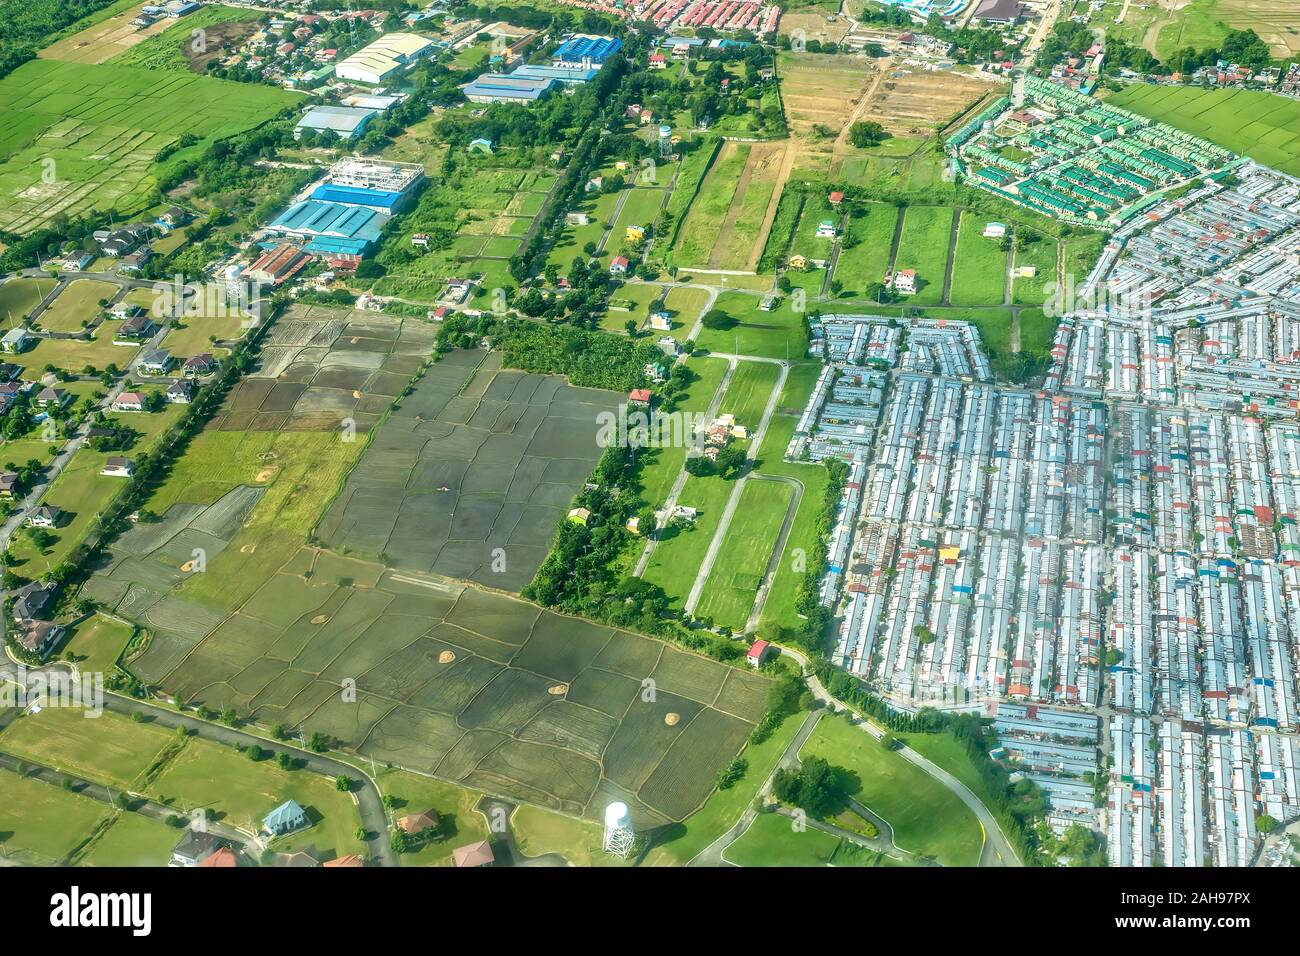 Aerial view showing dense urban expansion due to high population growth into agricultural farm land on Luzon island in the Philippines. Stock Photo